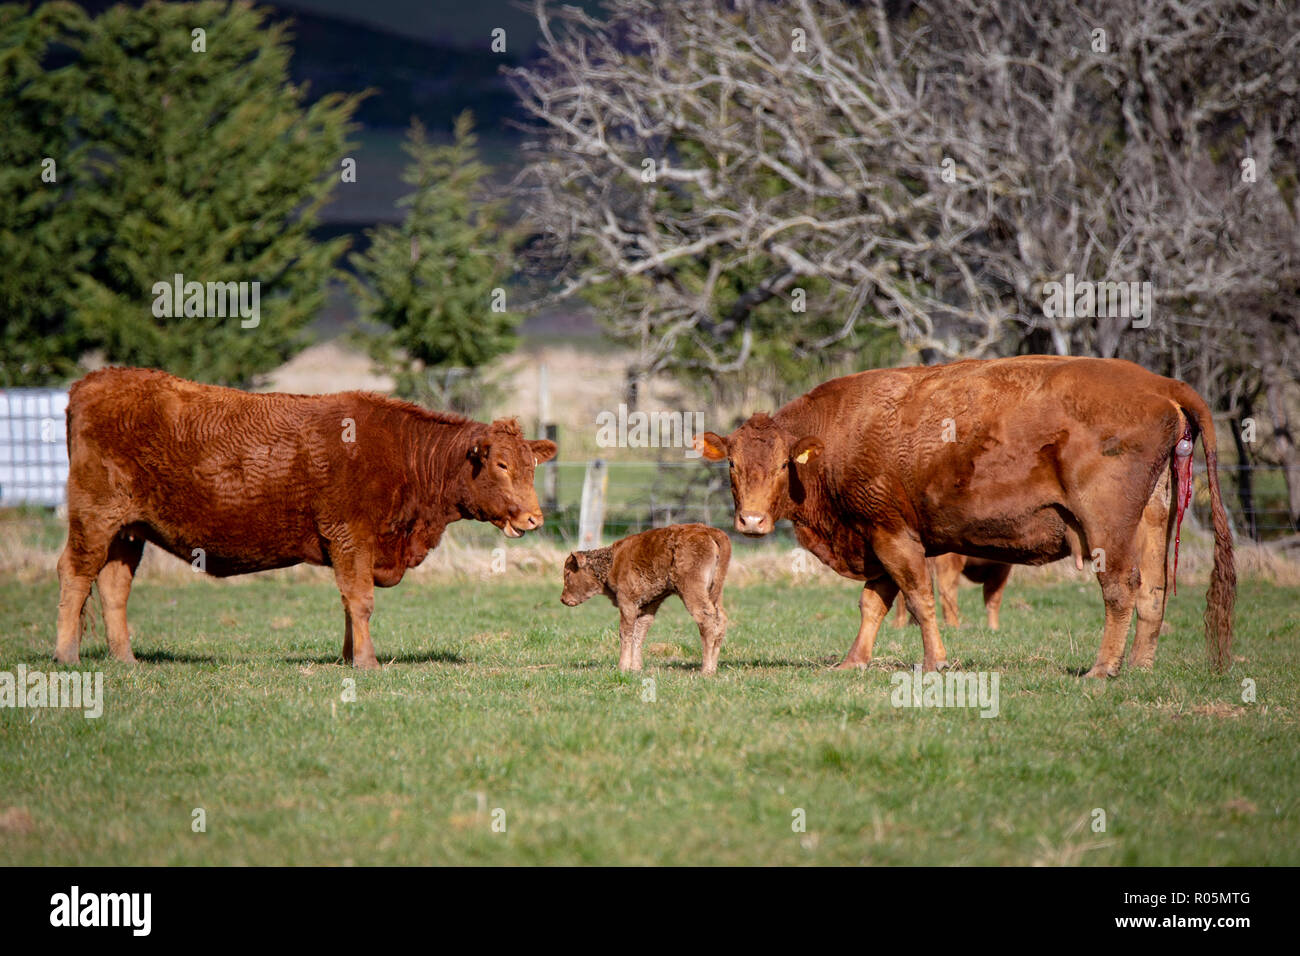 A Red Devon cow gives birth to a calf in a field while another cow looks on Stock Photo